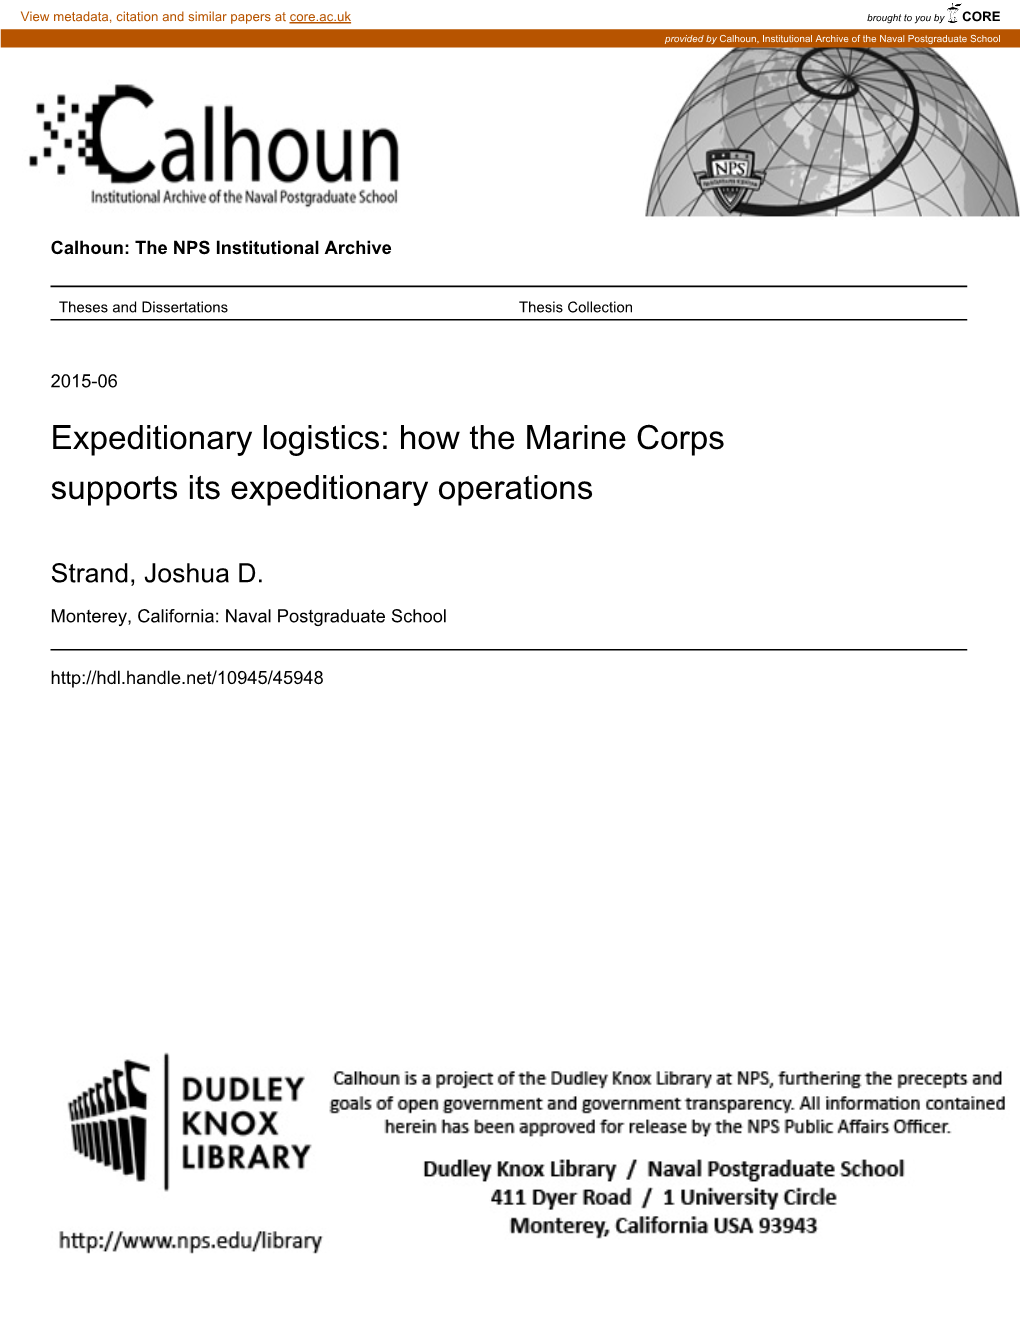 How the Marine Corps Supports Its Expeditionary Operations